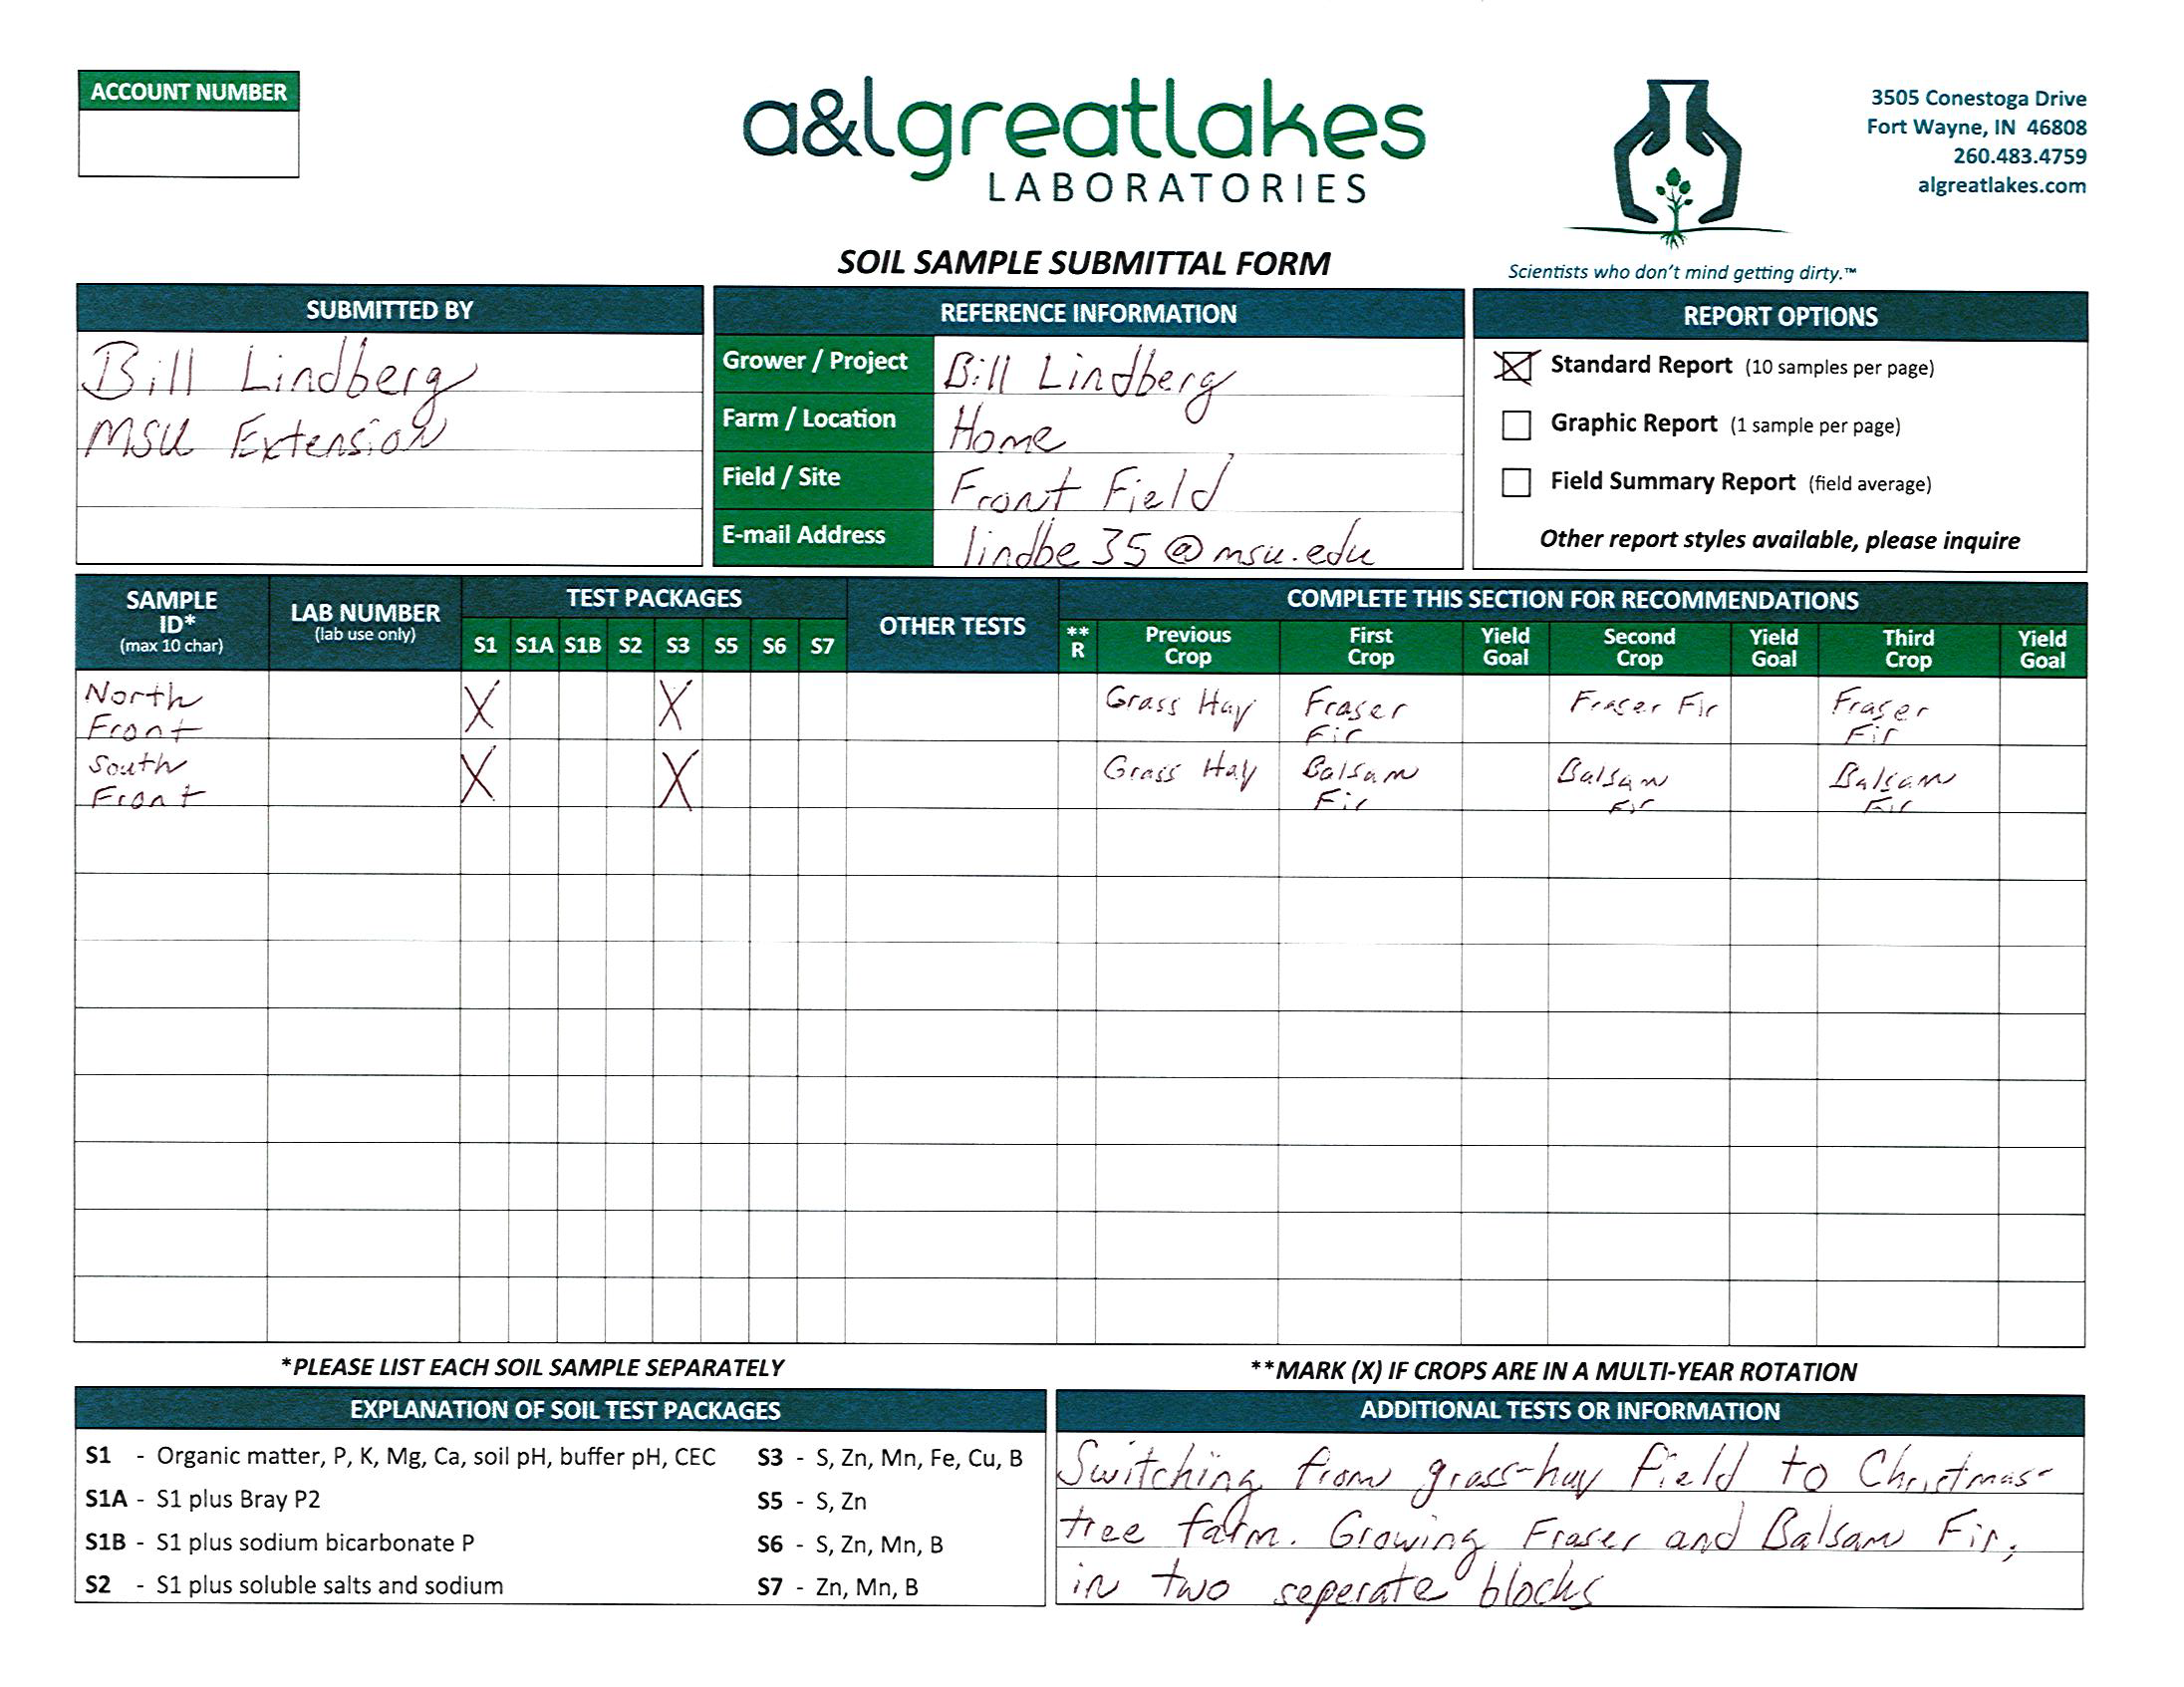 A soil sample submittal form filled out.